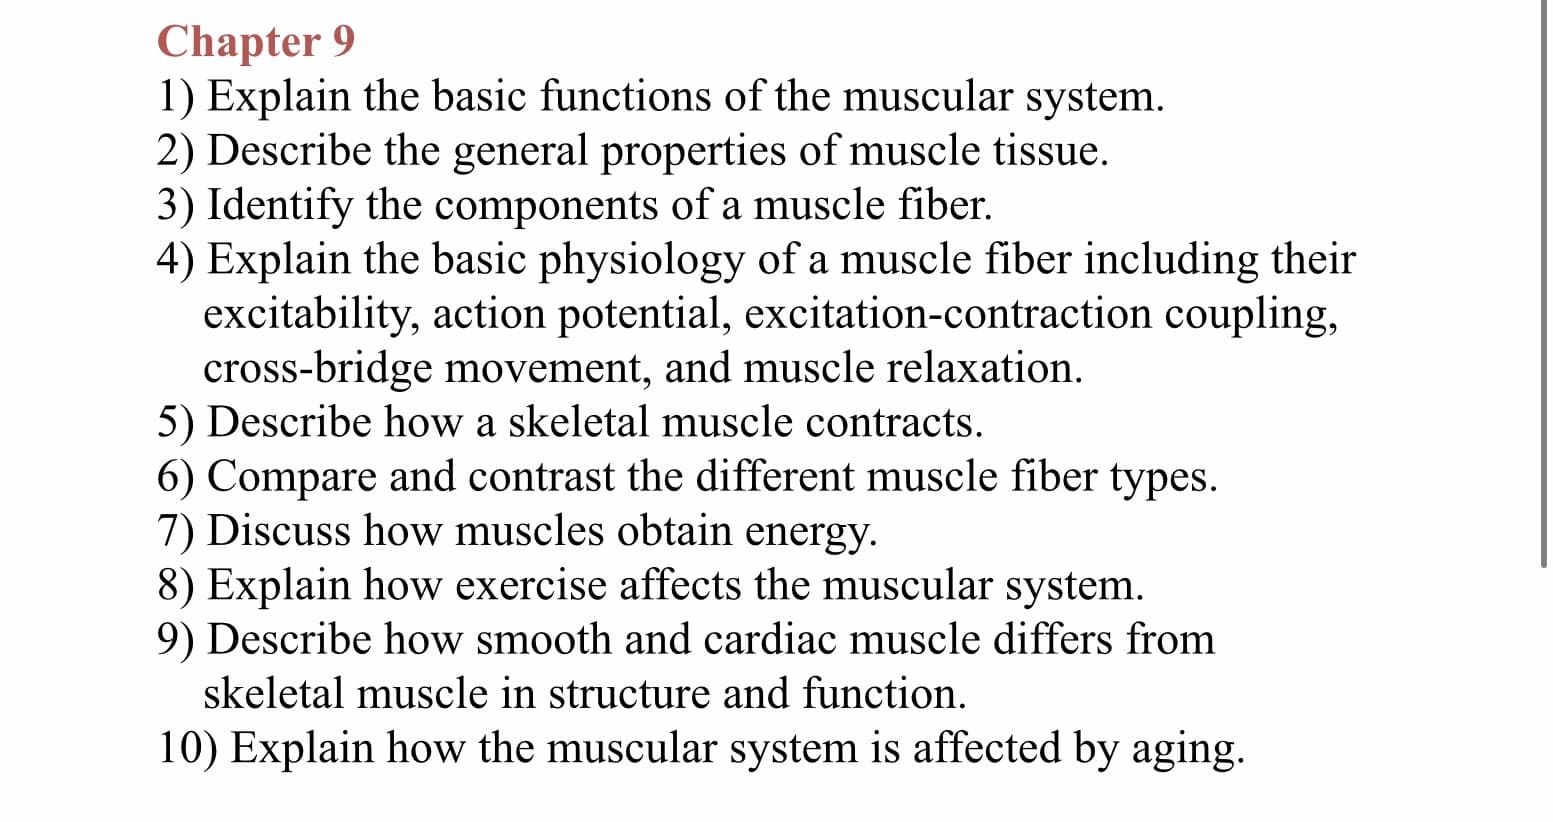 Chapter 9
1) Explain the basic functions of the muscular system
2) Describe the general properties of muscle tissue
3) Identify the components of a muscle fiber.
4) Explain the basic physiology of a muscle fiber including their
excitability, action potential, excitation-contraction coupling,
cross-bridge movement, and muscle relaxation
5) Describe how a skeletal muscle contracts
6) Compare and contrast the different muscle fiber types.
7) Discuss how muscles obtain energy
8) Explain how exercise affects the muscular system
9) Describe how smooth and cardiac muscle differs from
skeletal muscle in structure and function.
10) Explain how the muscular system is affected by aging
